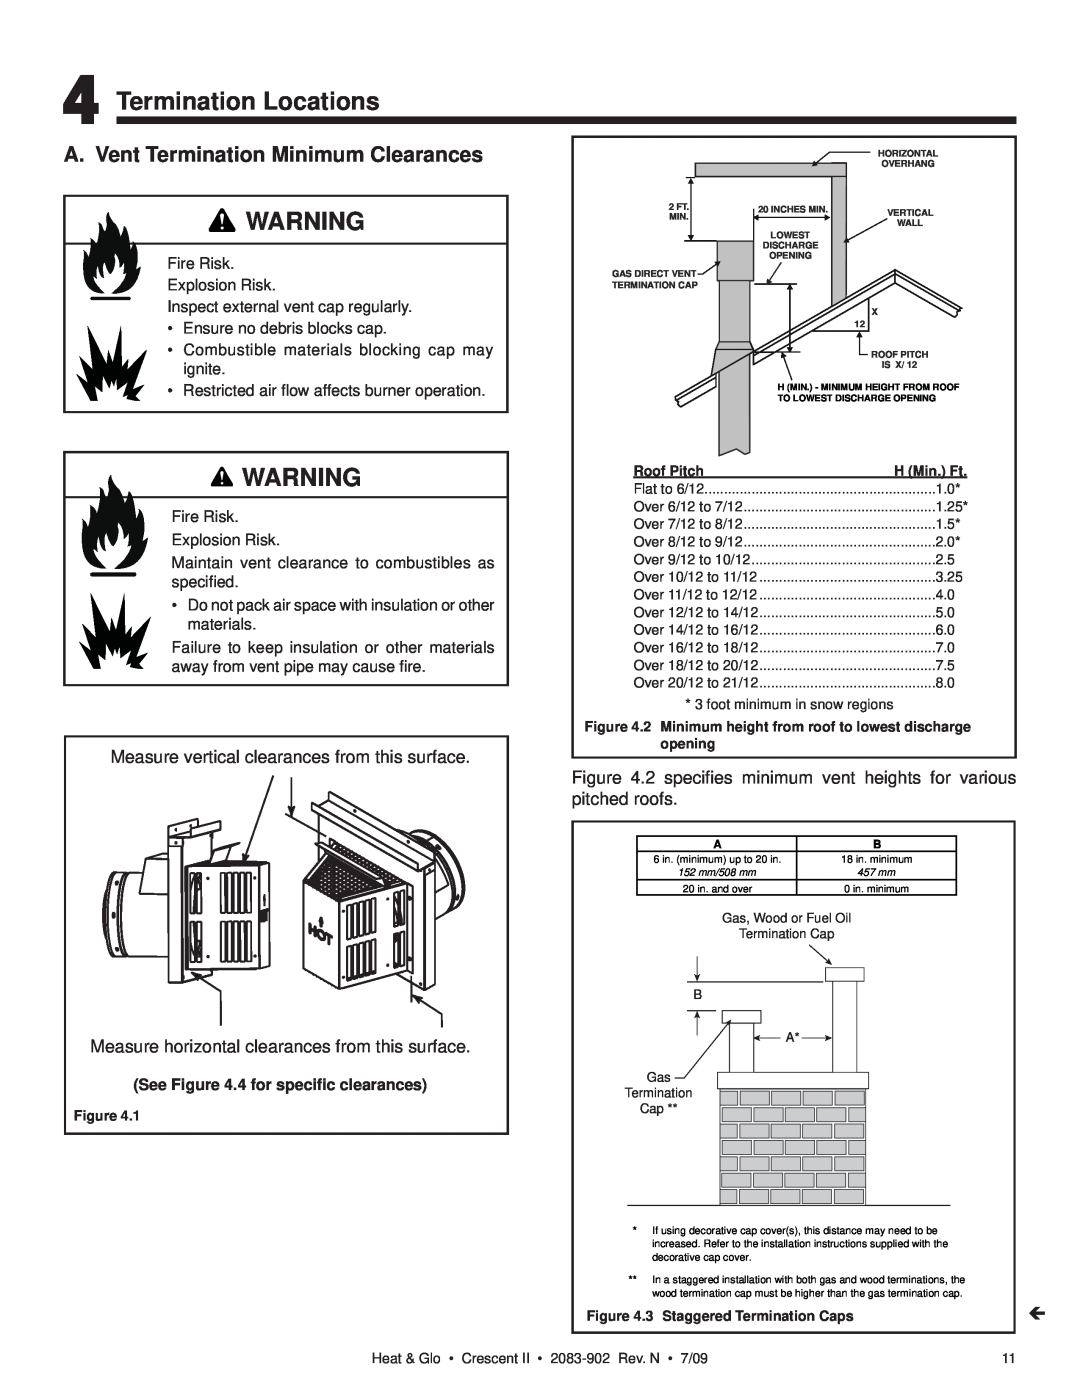 Heat & Glo LifeStyle CRESCENT II owner manual Termination Locations, A. Vent Termination Minimum Clearances, Roof Pitch 